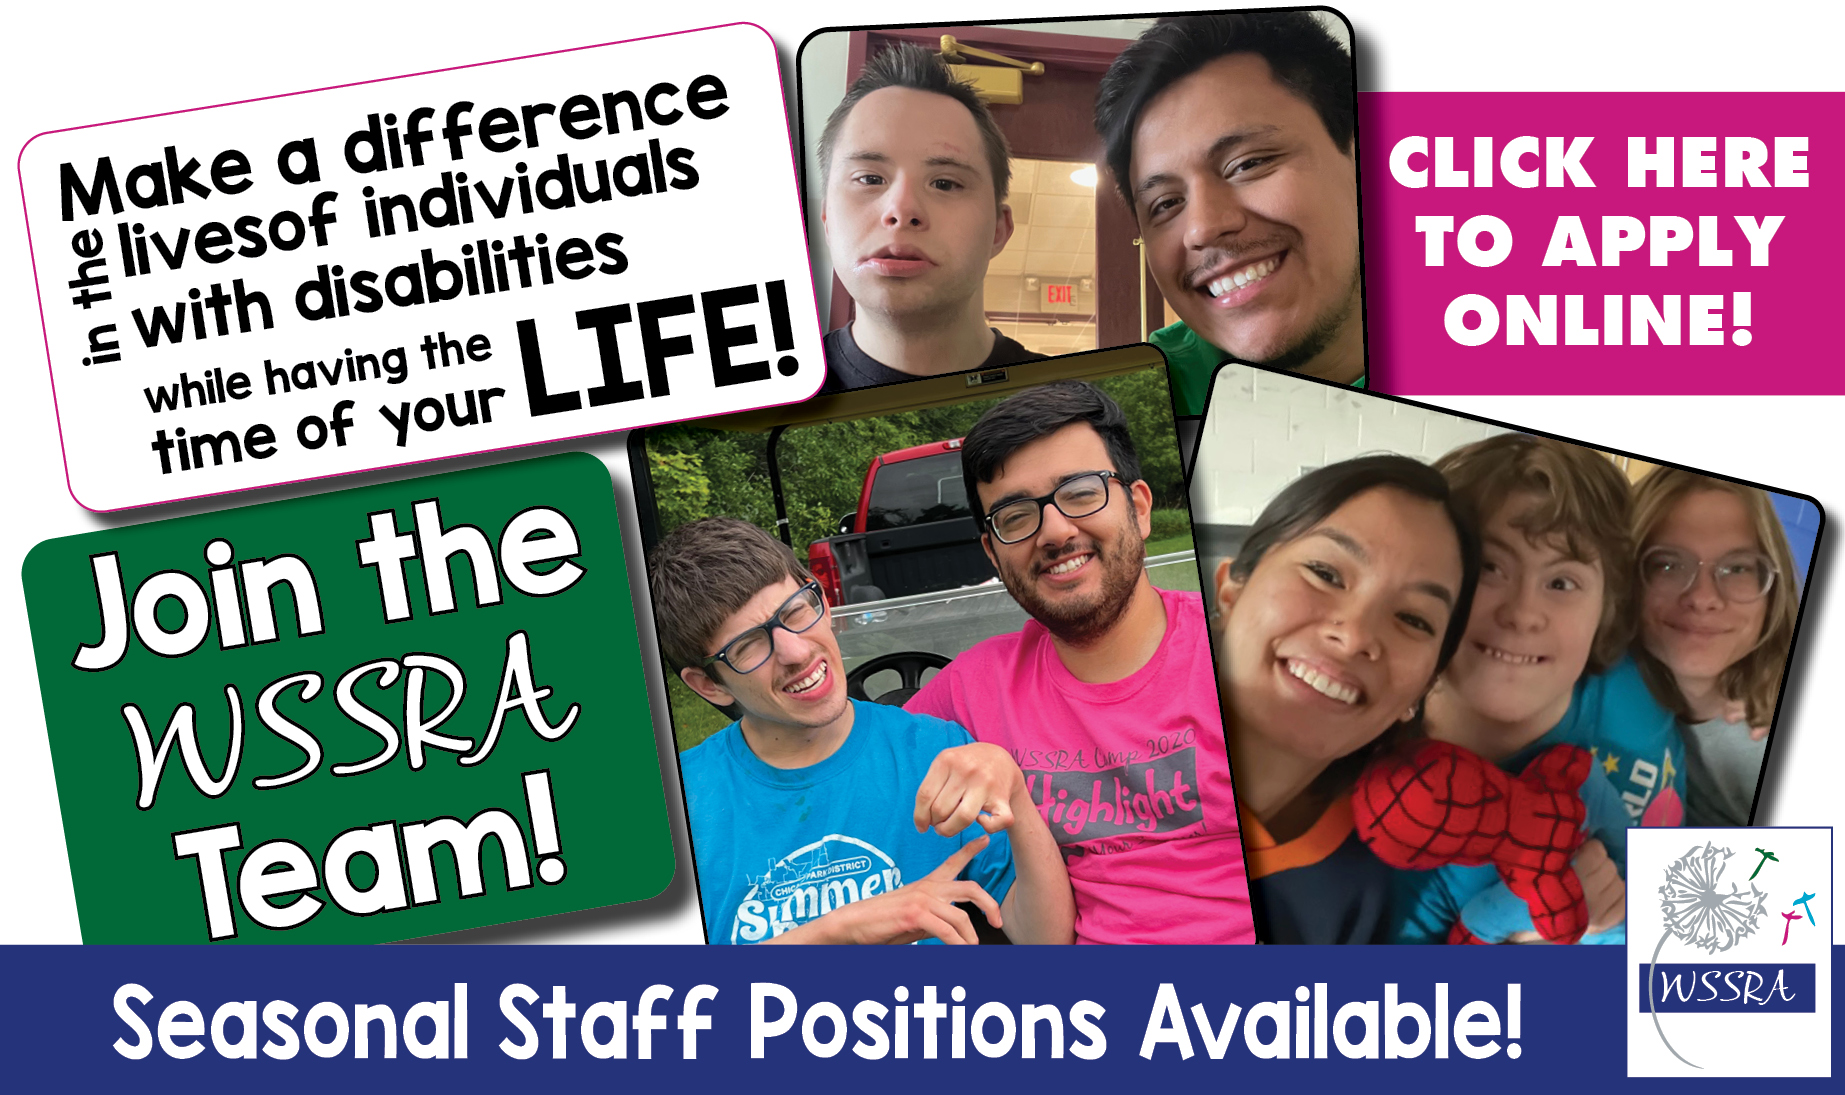 Join the WSSRA Team!